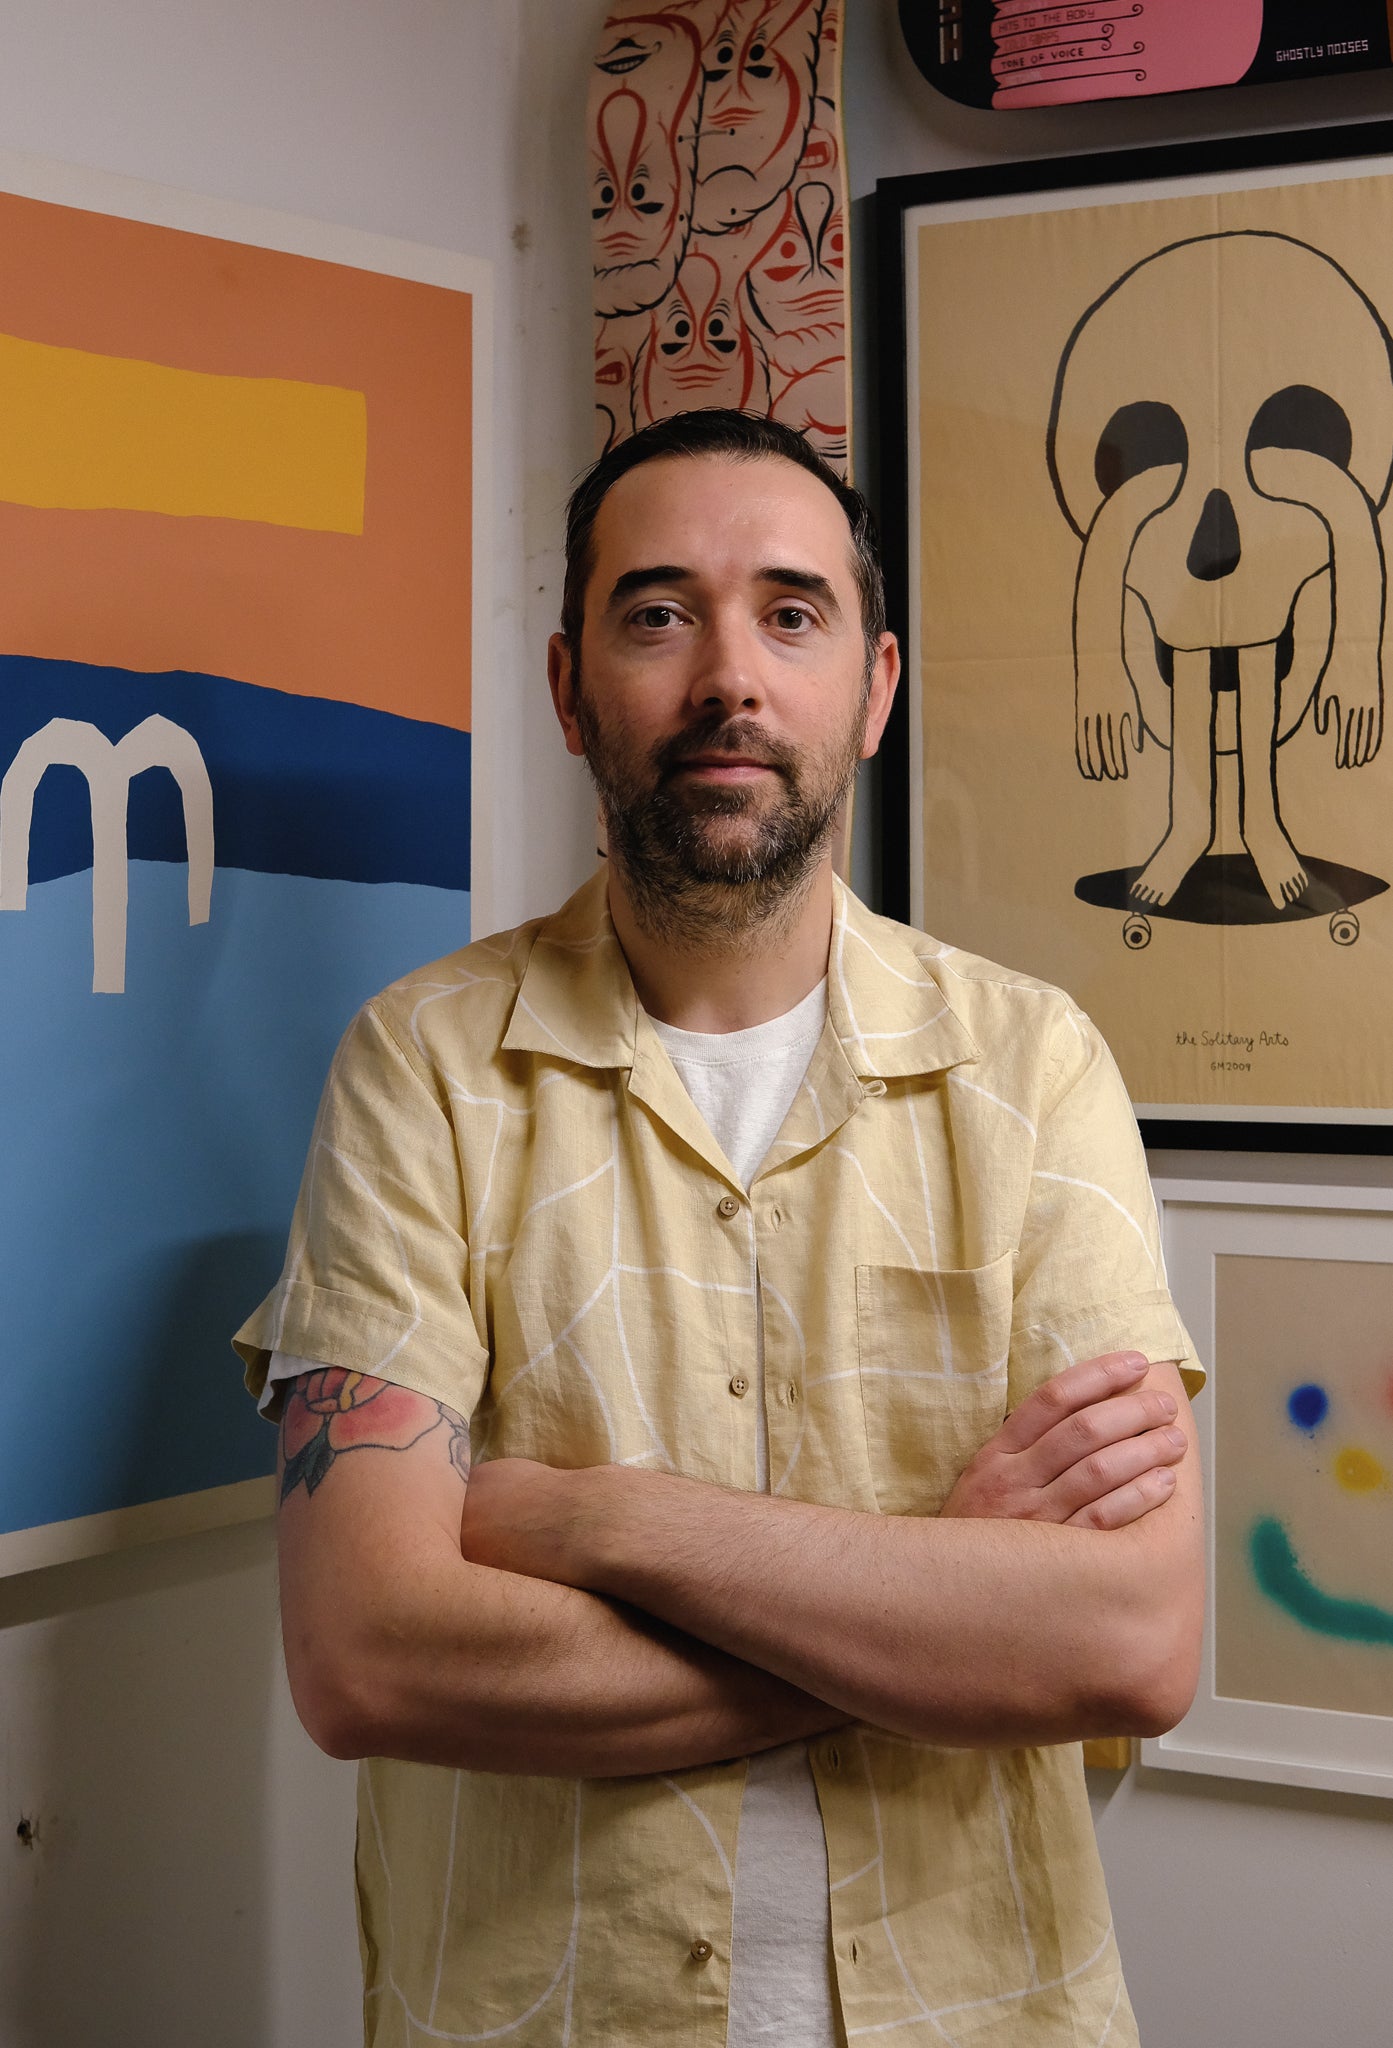 A portrait of Scott in his studio surrounded by colorful artwork.